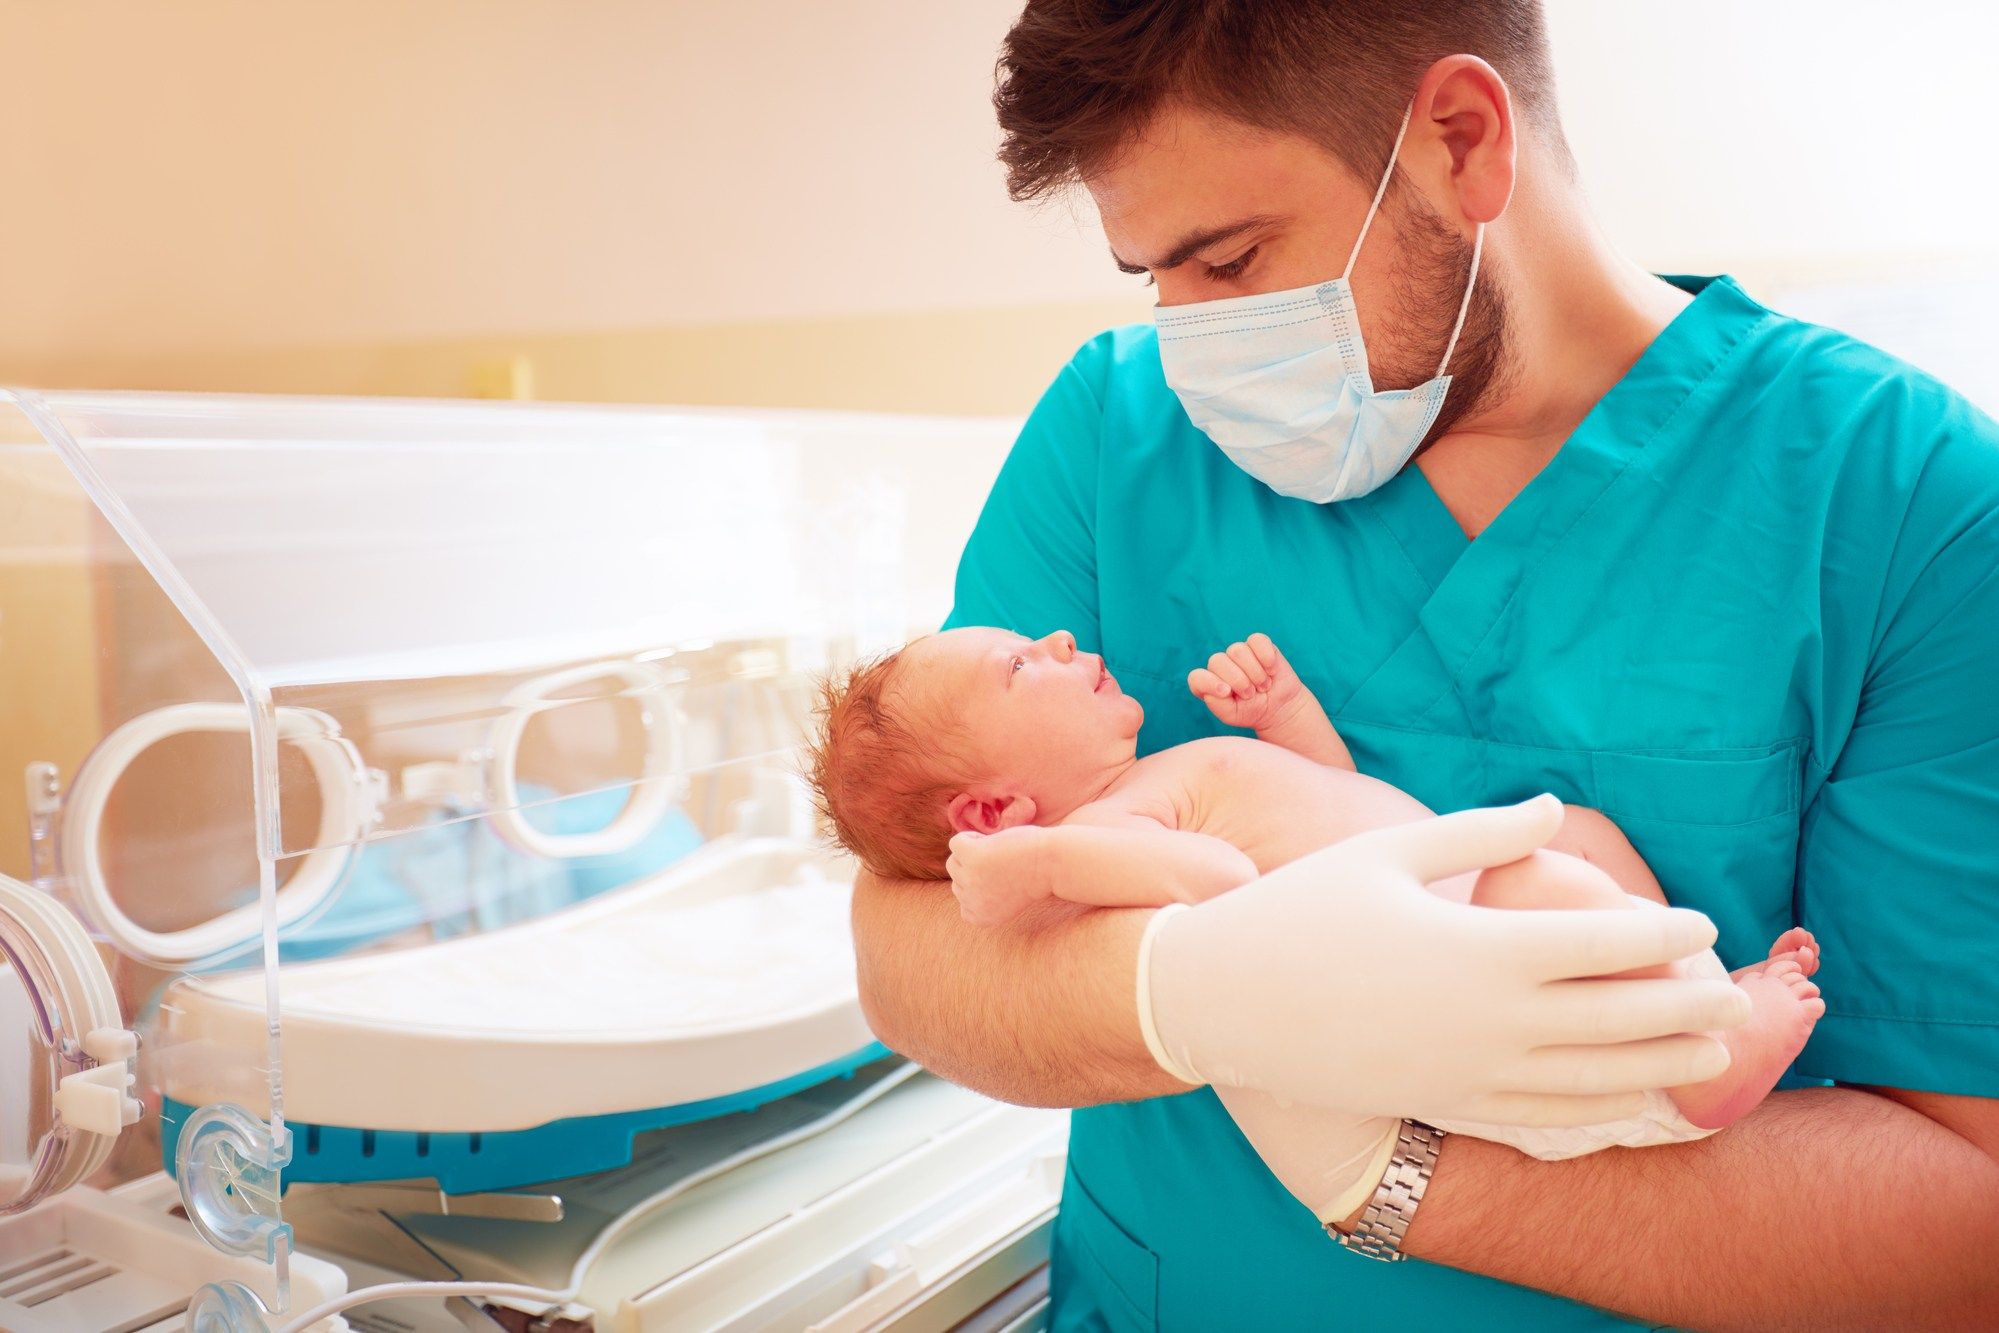 Young man holds newborn baby in hospital